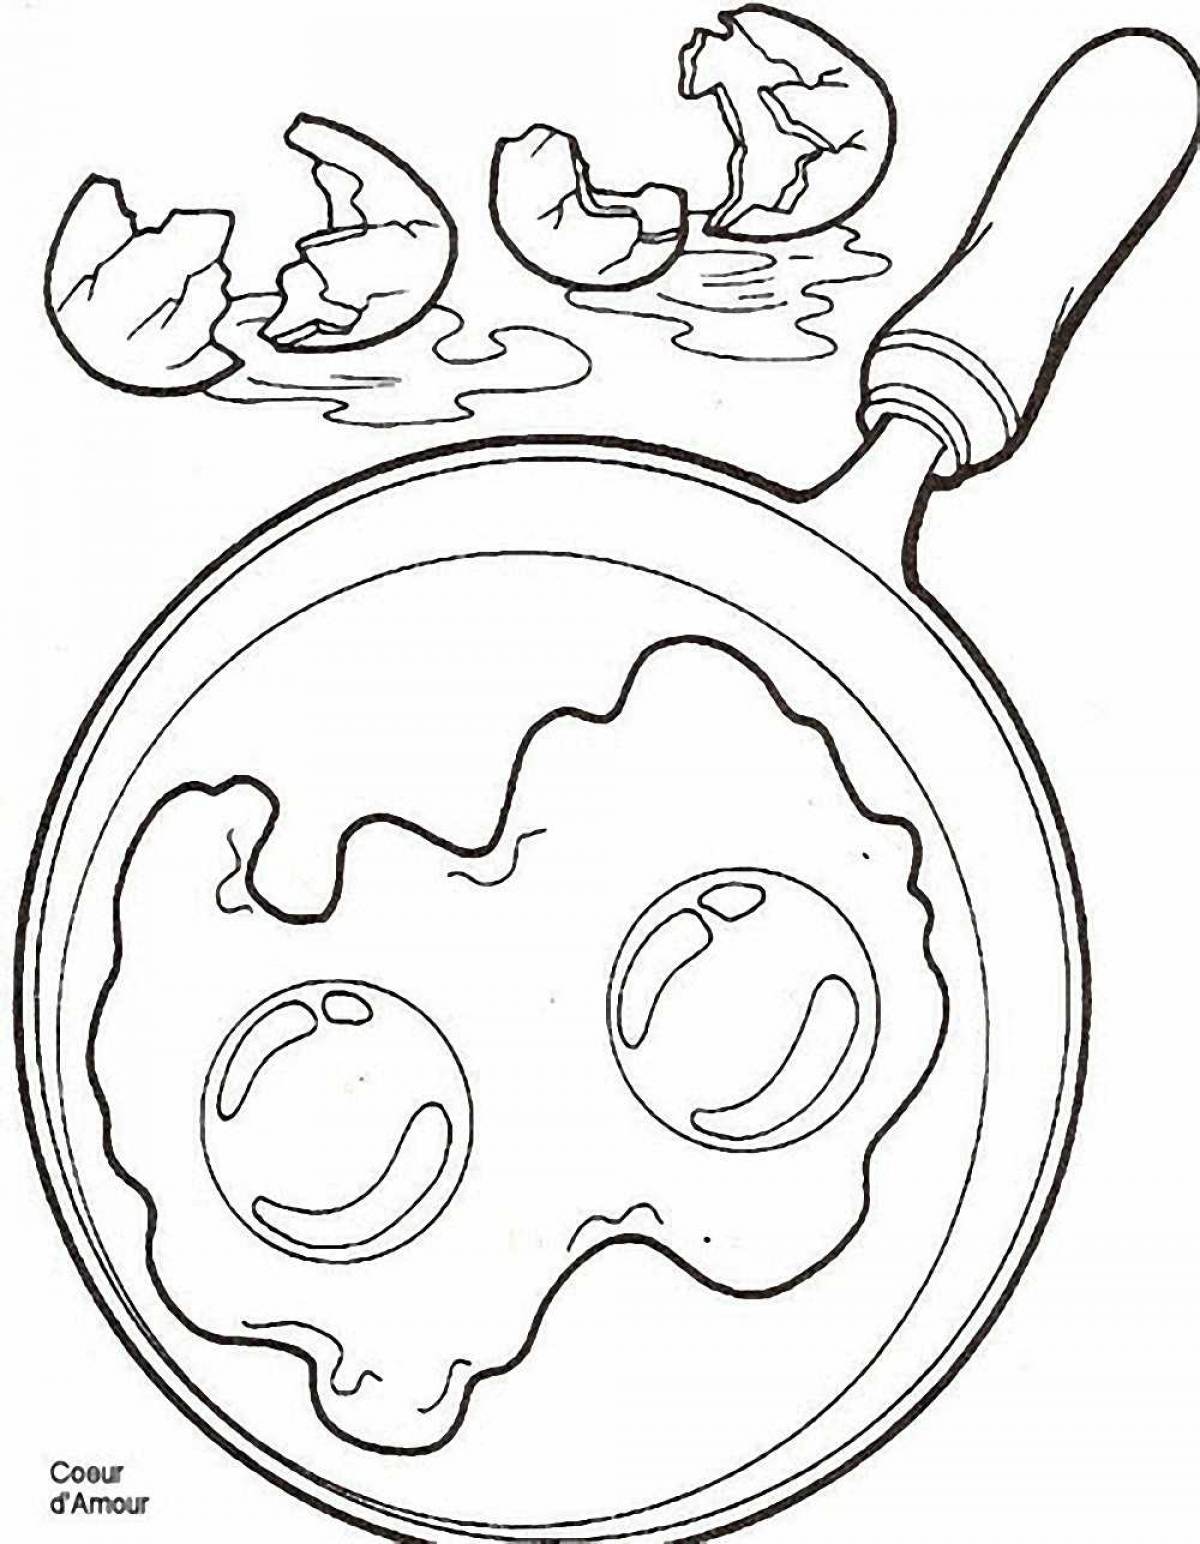 Impressive omelet coloring page